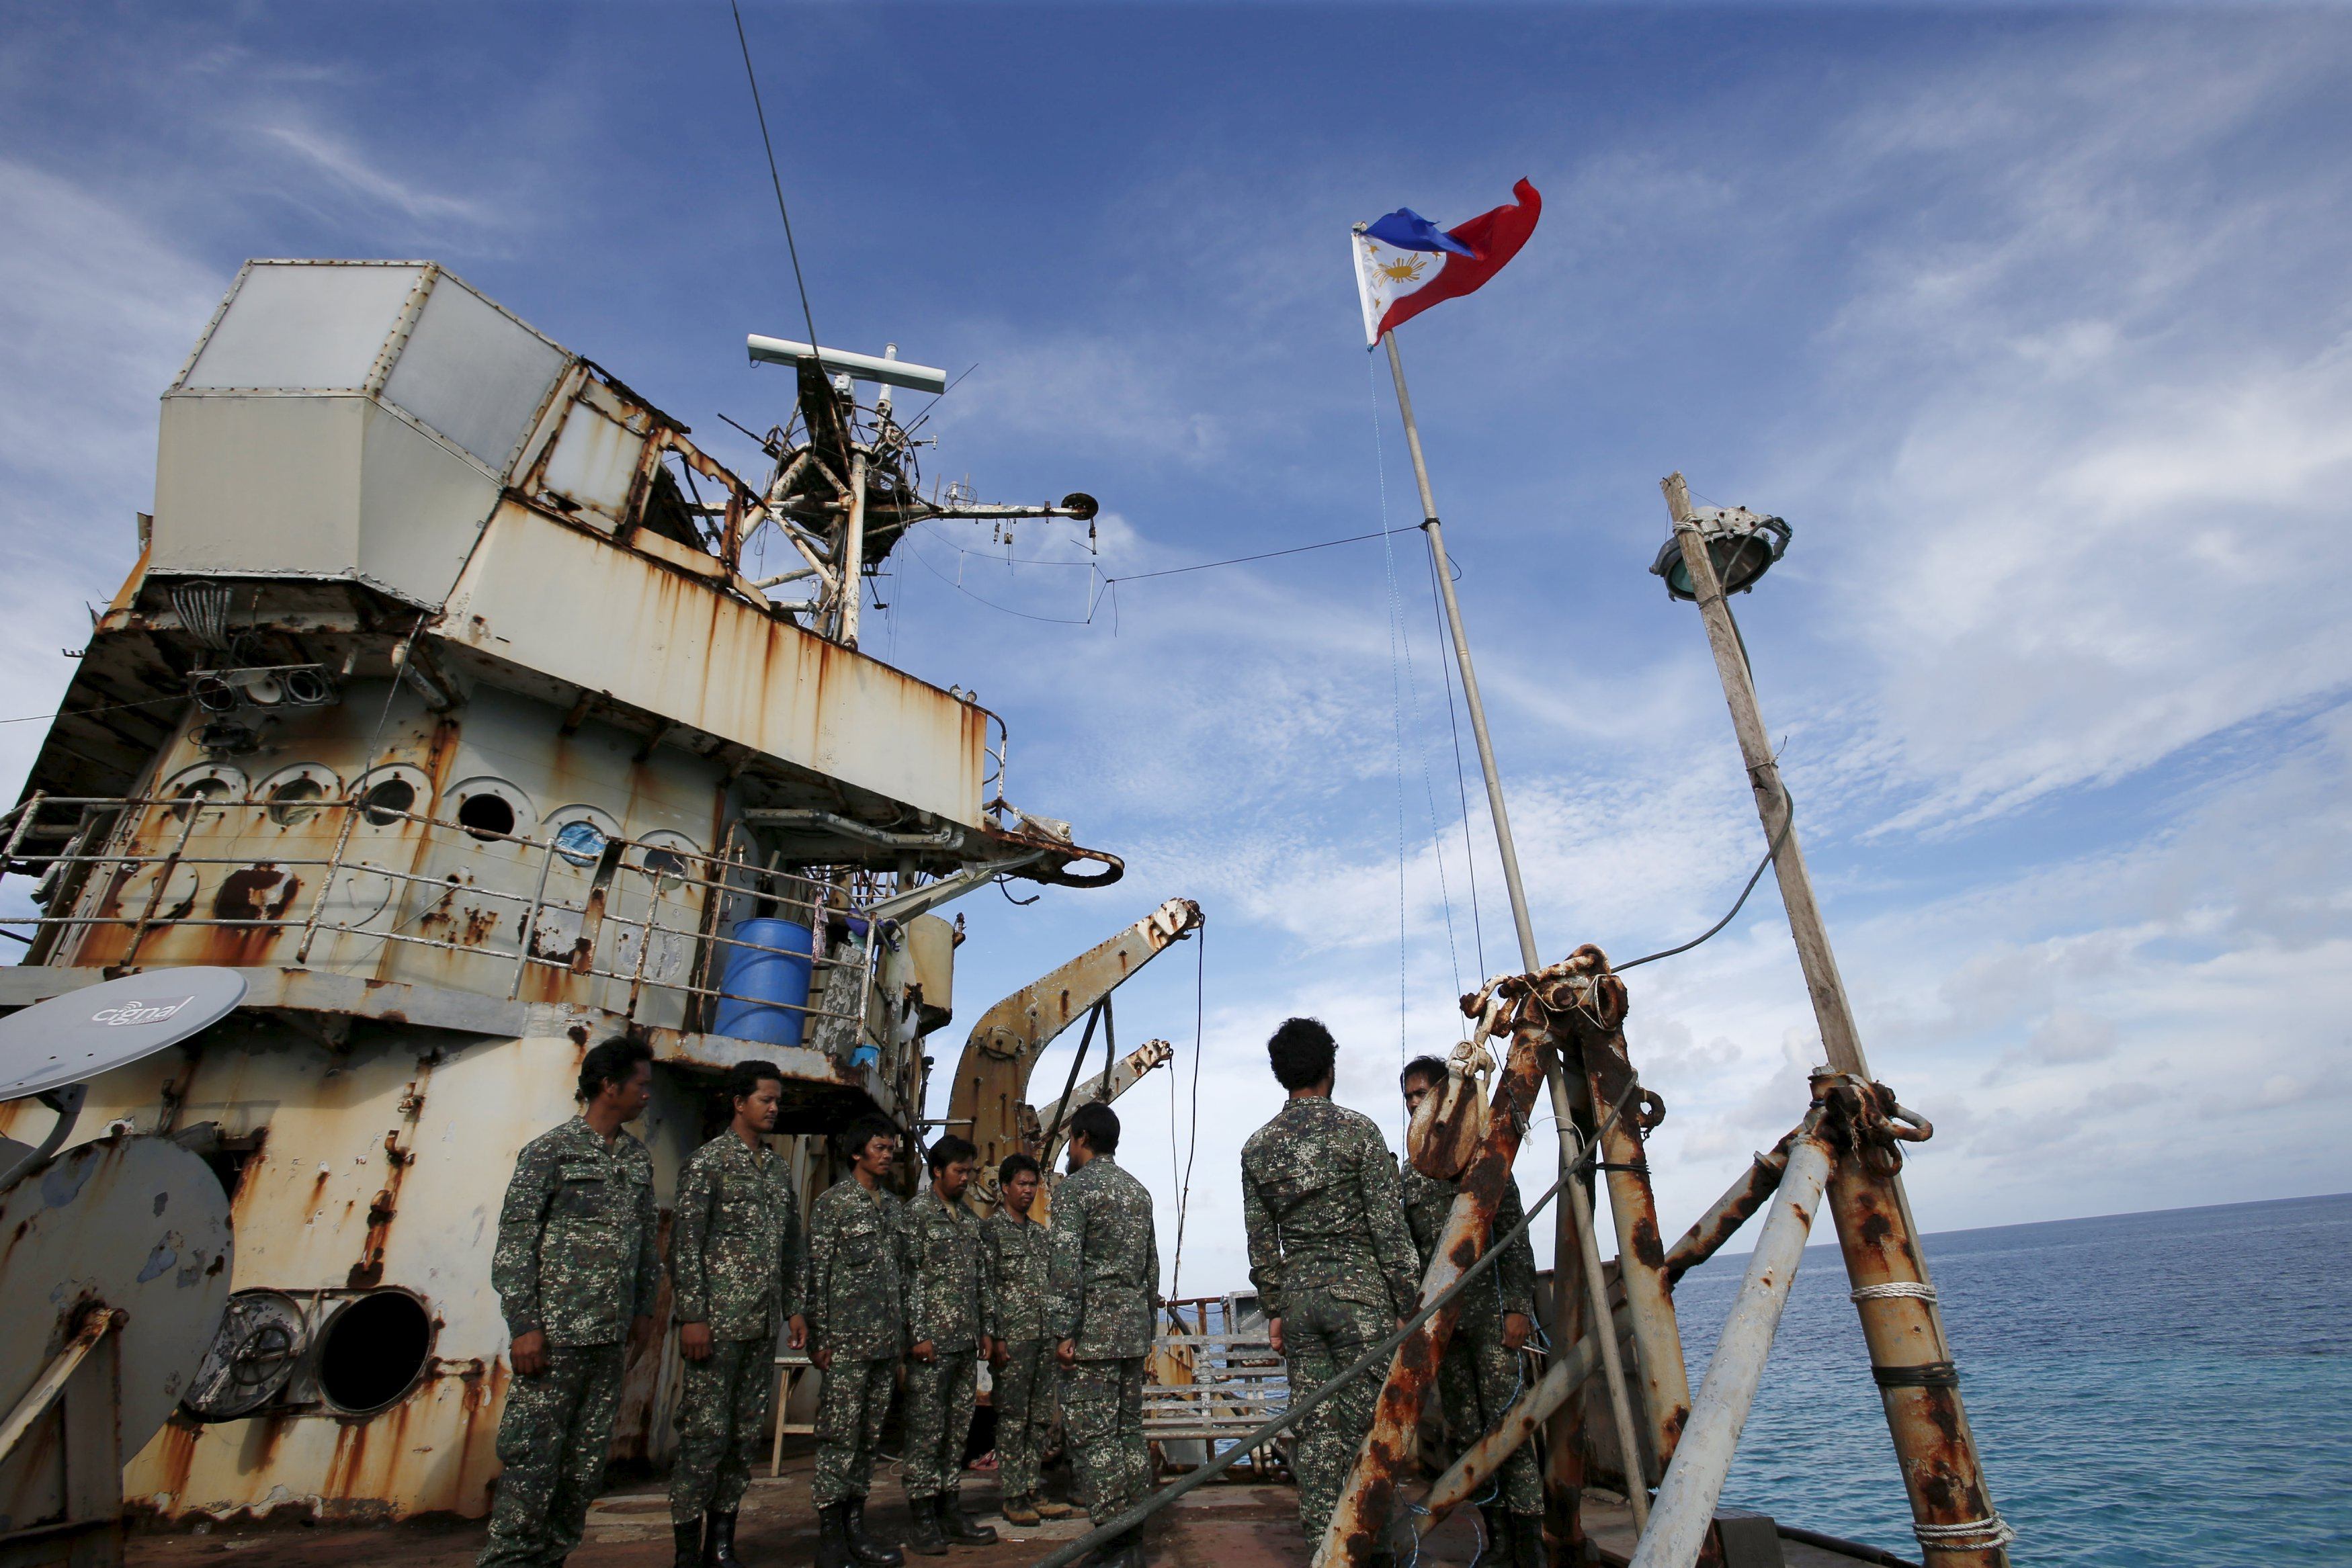 Among China’s neighbours, the Philippines has been the most assertive in countering Beijing’s territorial claims in the South China Sea in recent years. Photo: Reuters